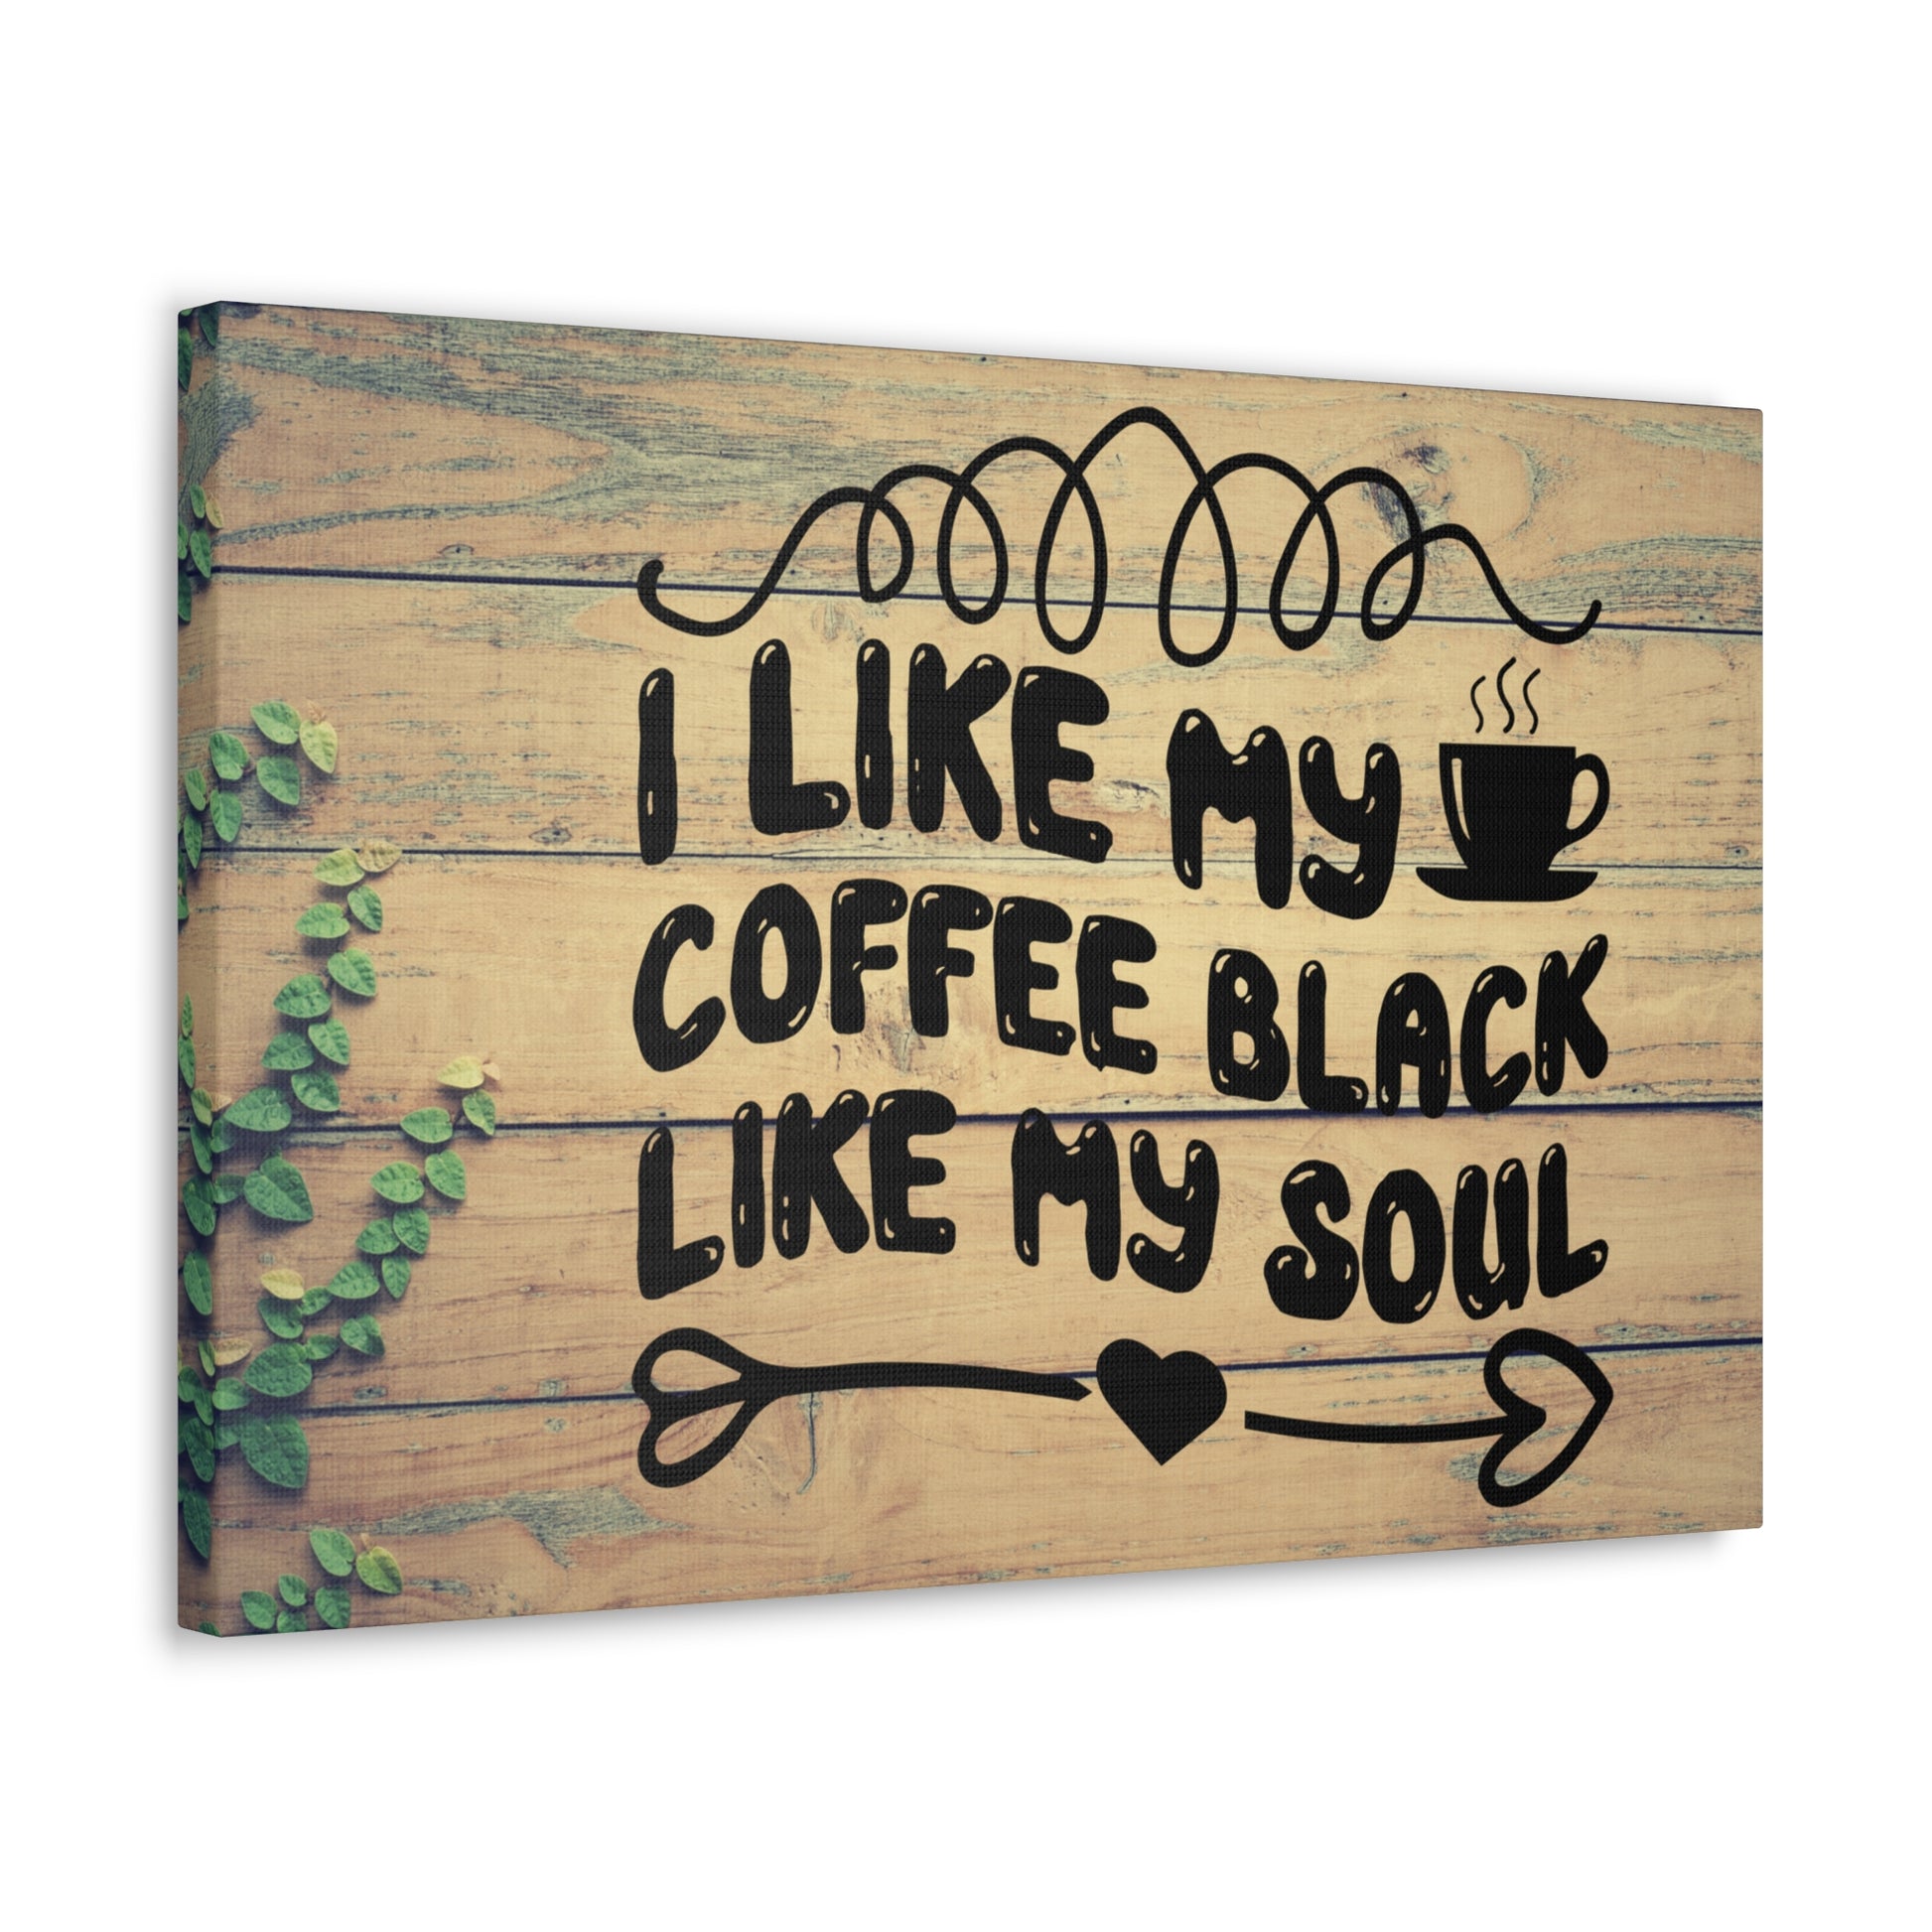 "I Like My Coffee Black Like My Soul" Wall Art - Weave Got Gifts - Unique Gifts You Won’t Find Anywhere Else!